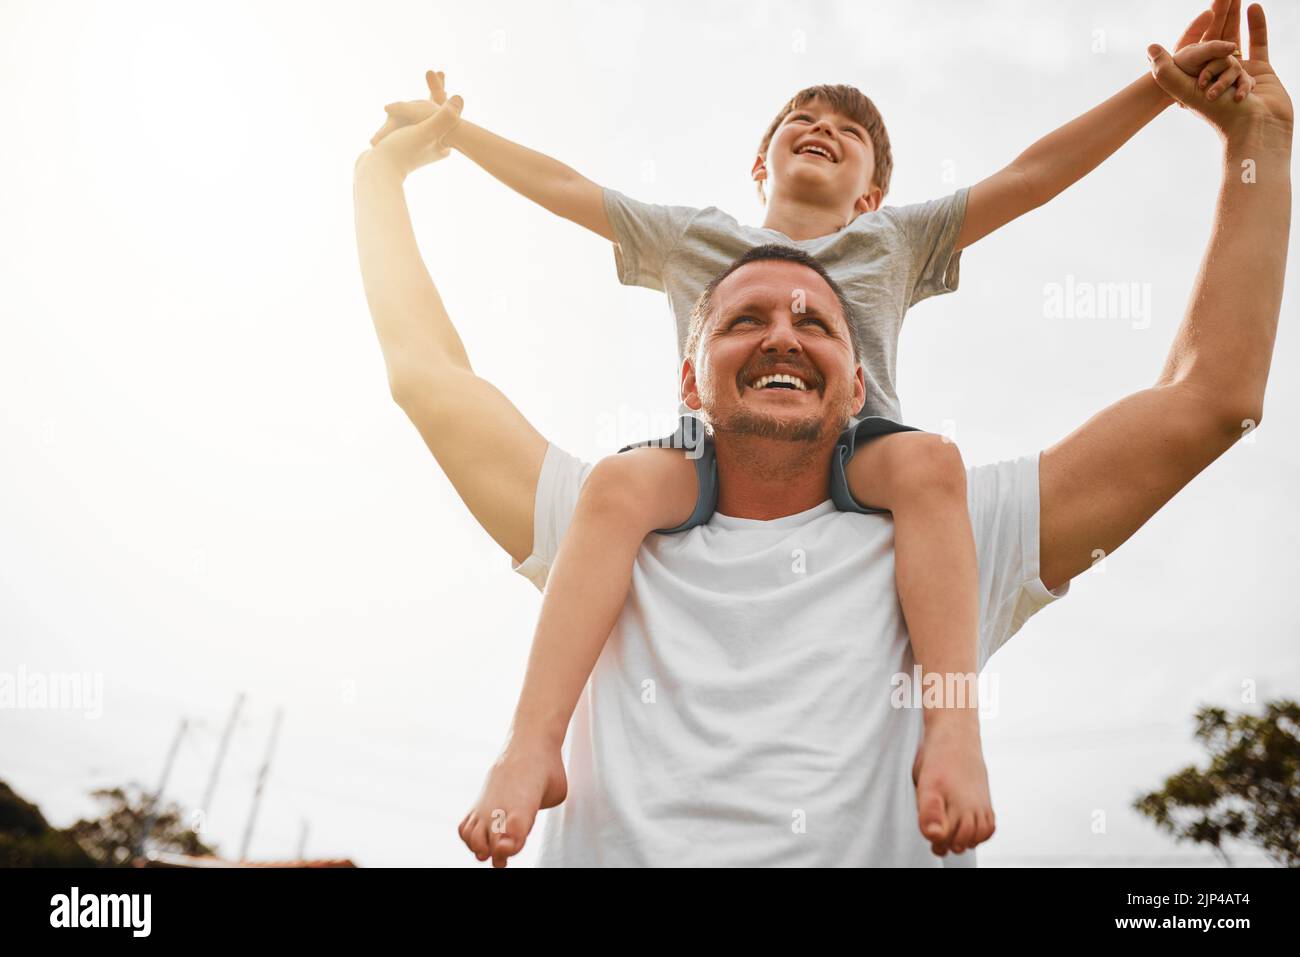 Riding high on dads shoulders. Low angle shot of a mature man carrying his young son on his shoulders outside. Stock Photo